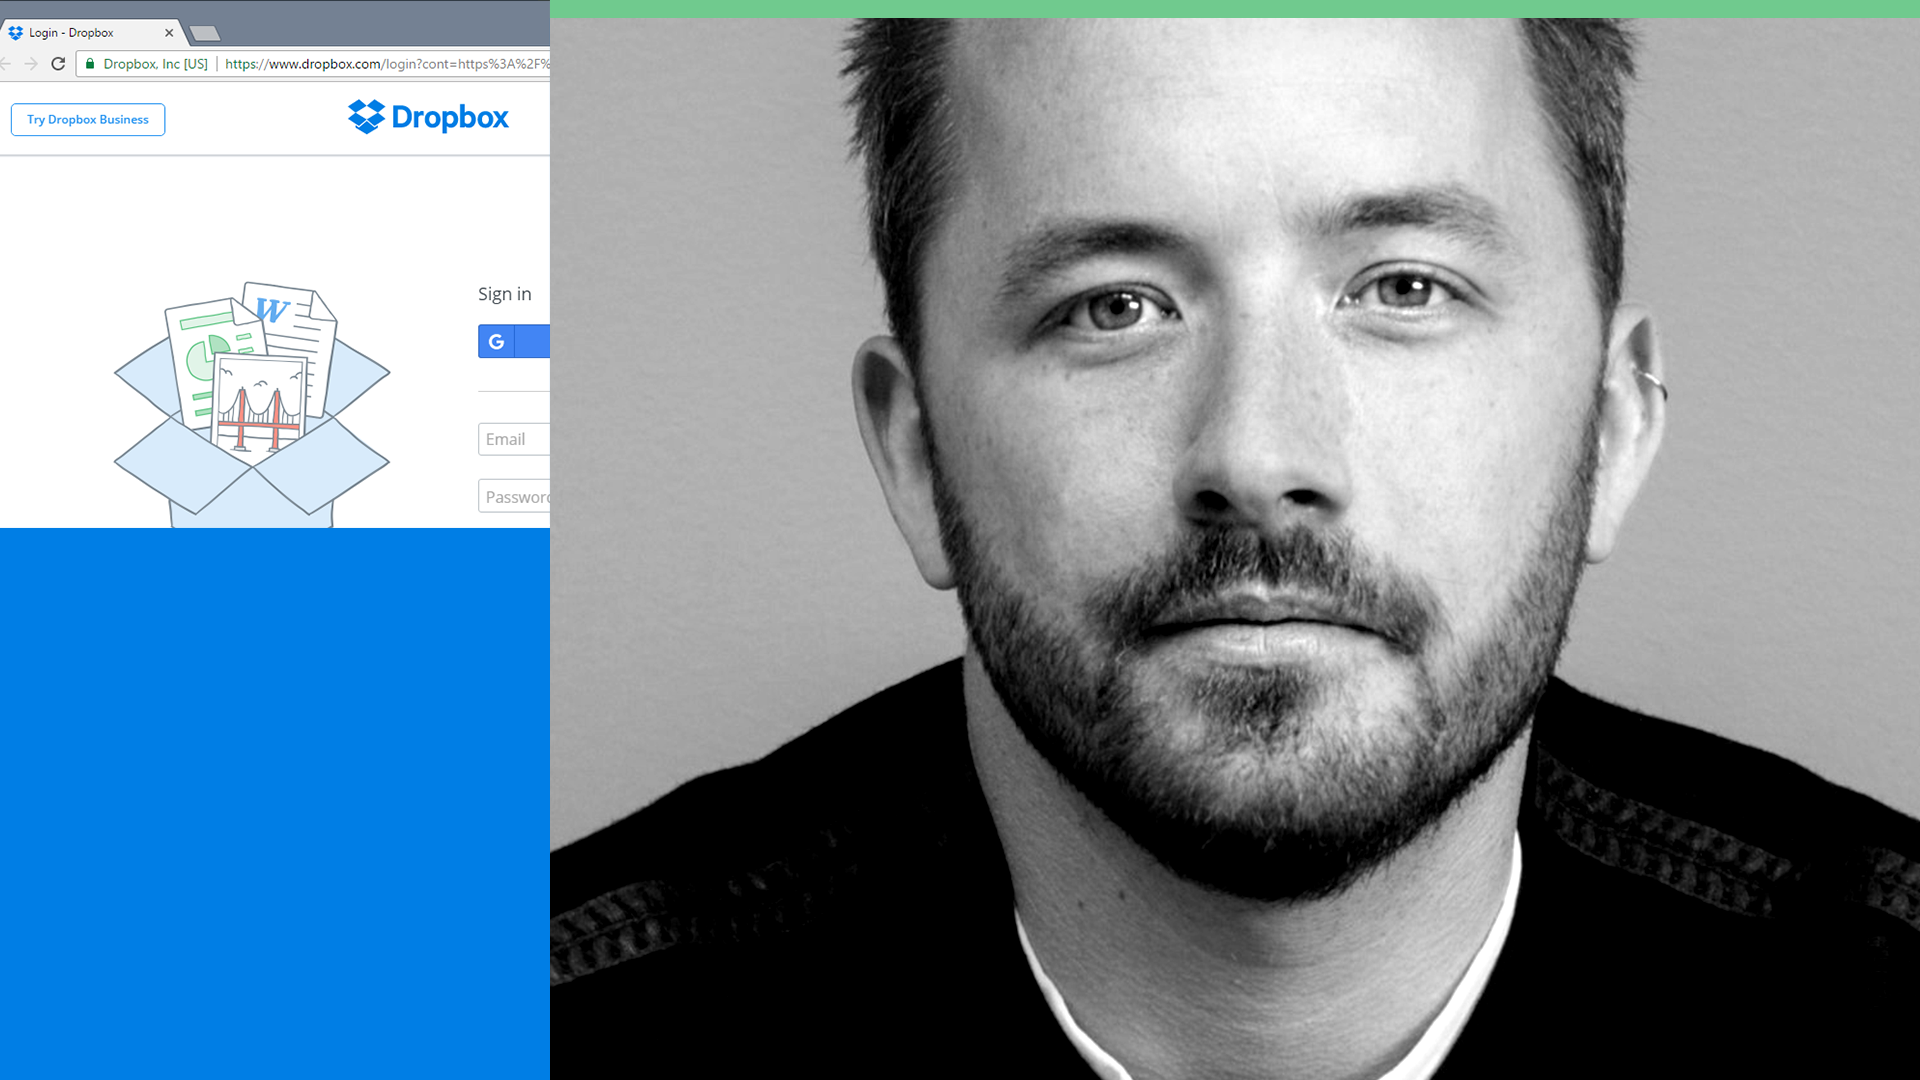 Dropbox co-founder and CEO Drew Houston